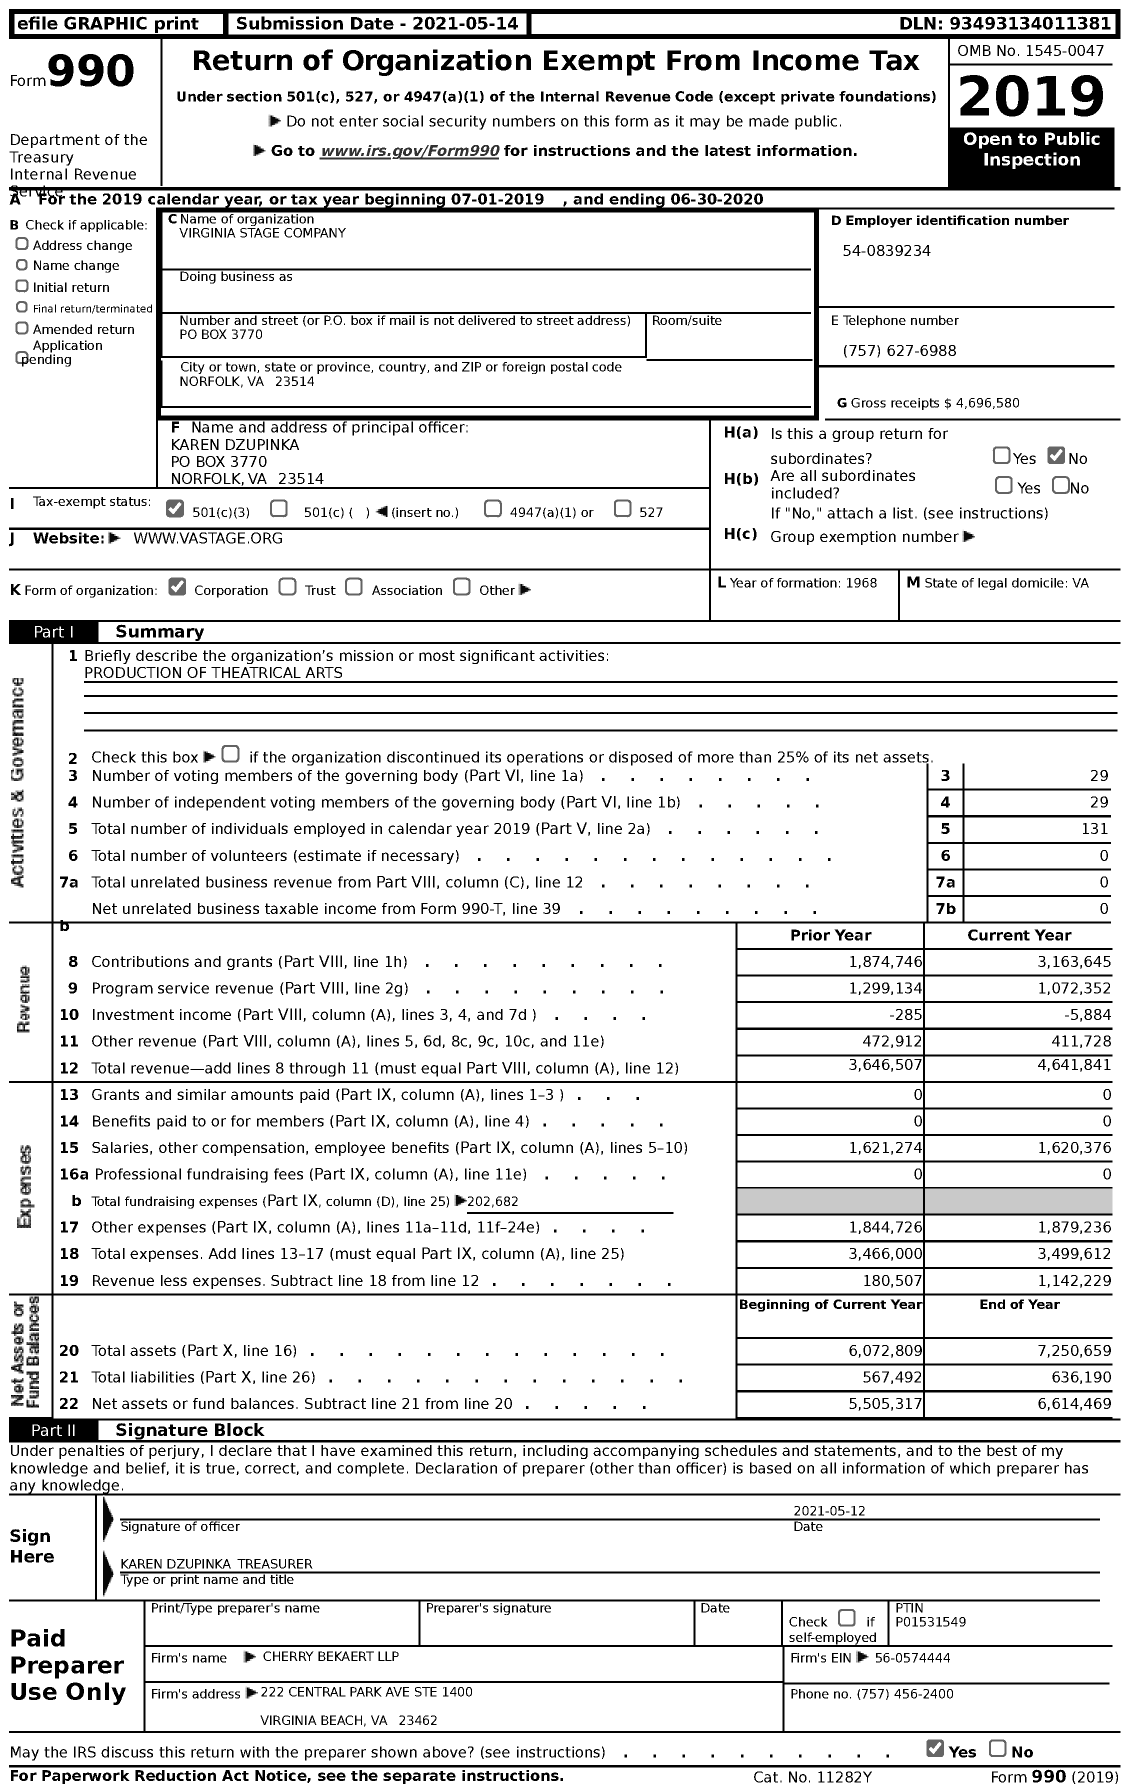 Image of first page of 2019 Form 990 for Virginia Stage Company (VSC)